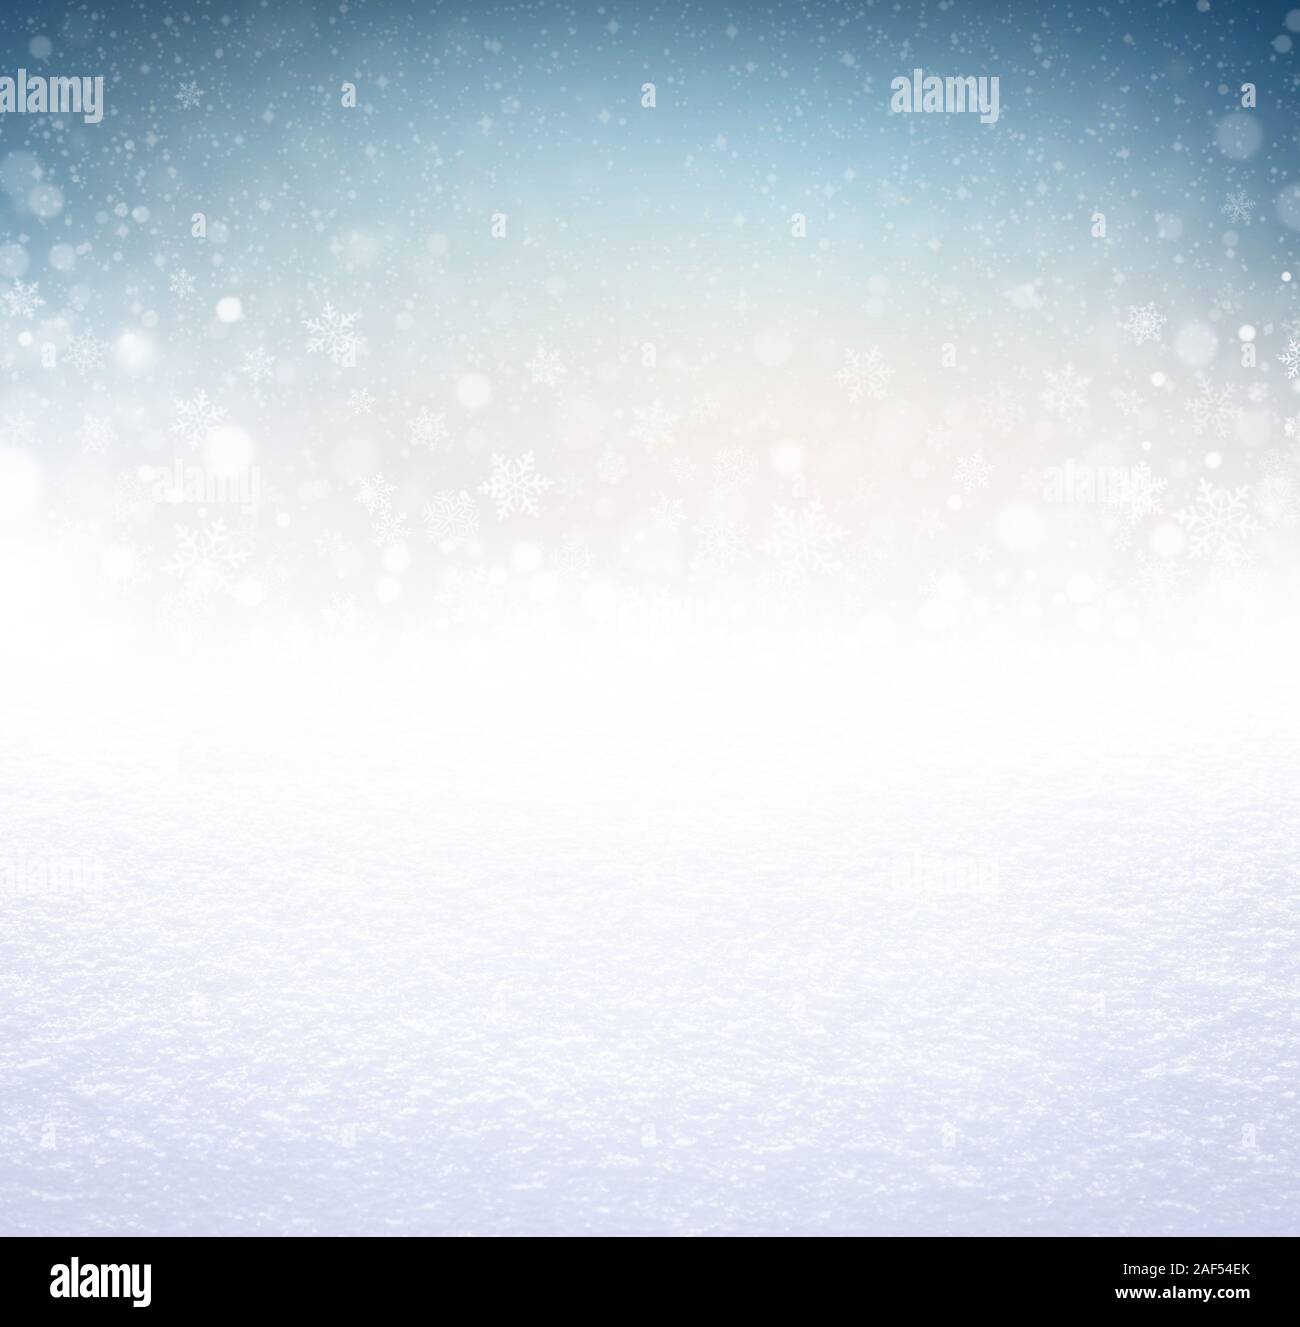 Snowflakes and snowfall on a cold blue winter background and a powder snow ground Stock Photo